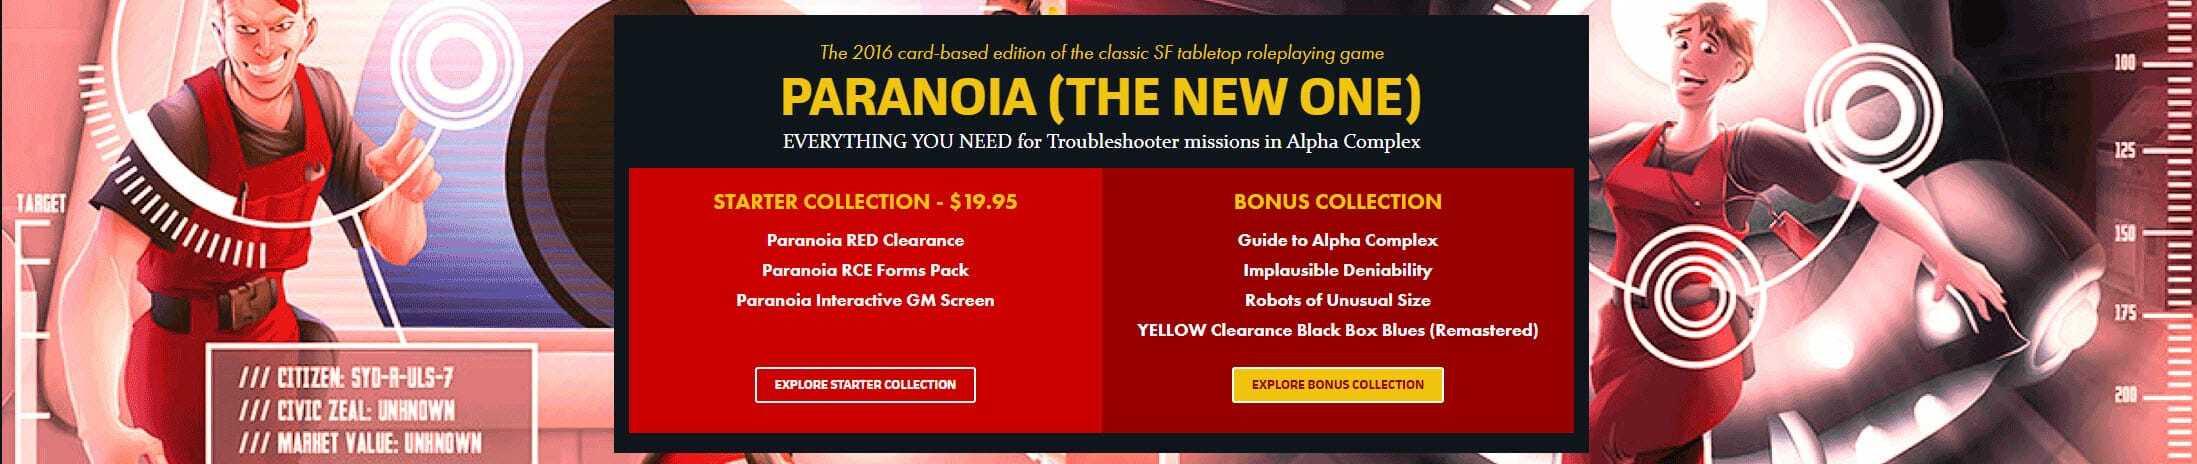 Paranoia RED Clearance Bundle